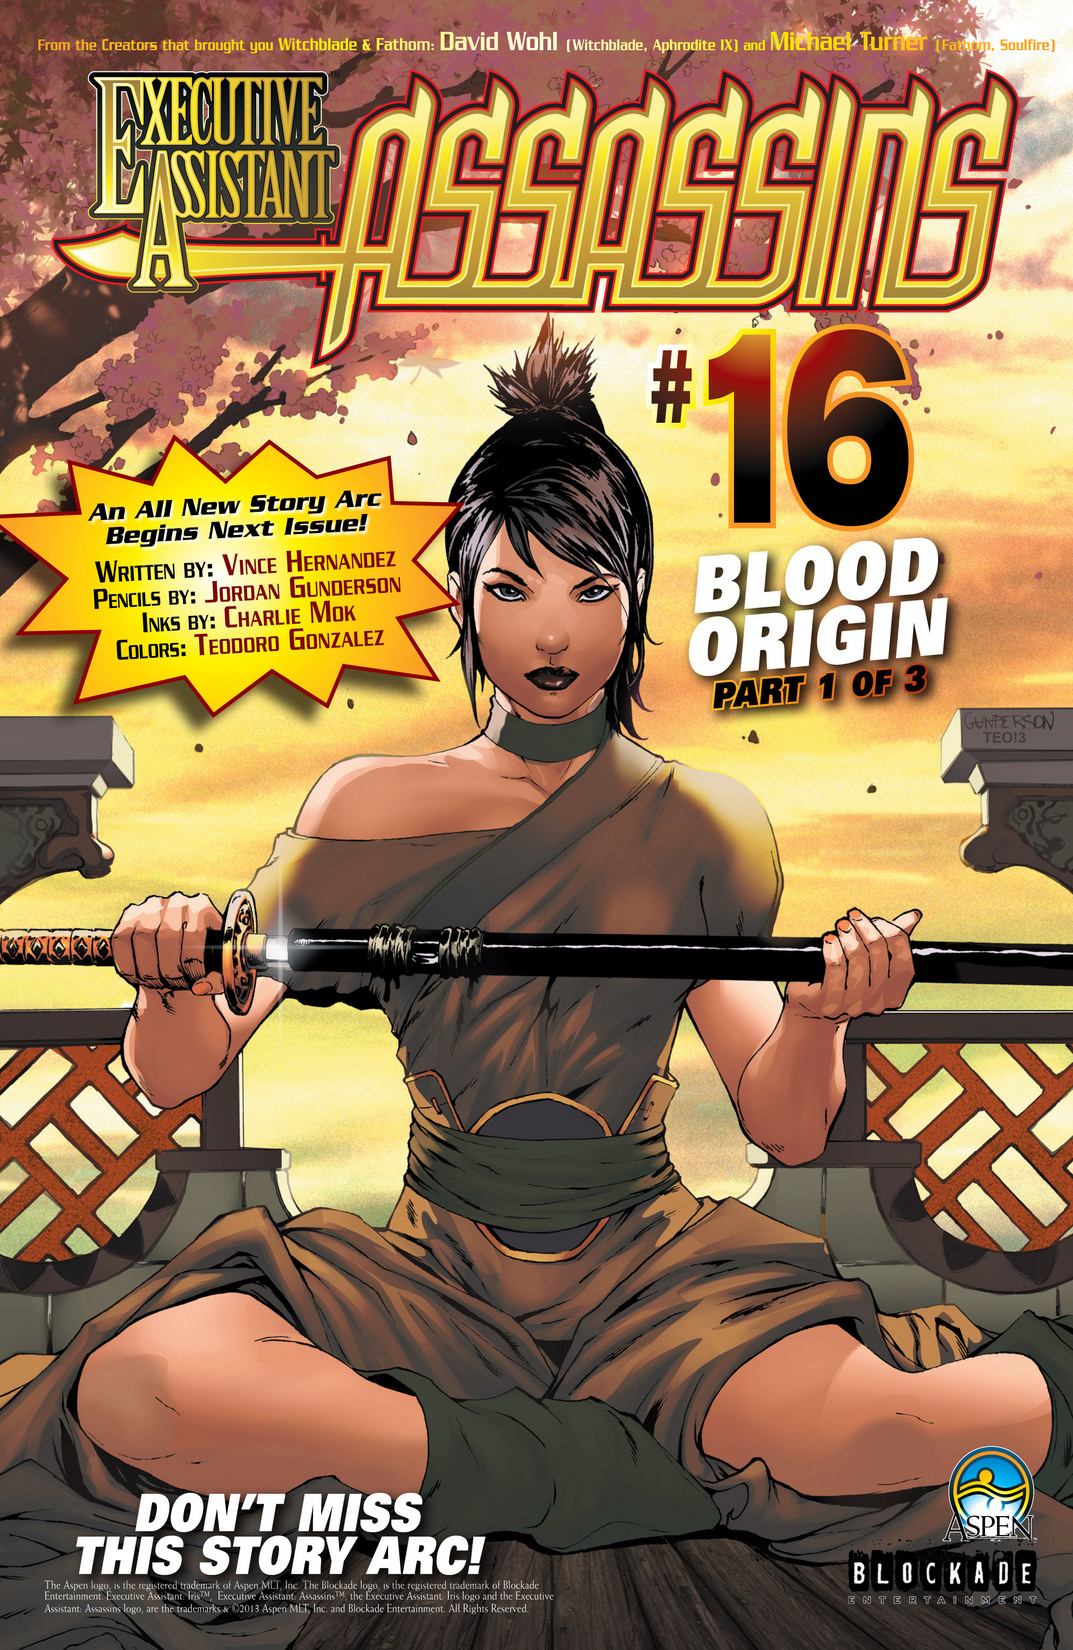 Read online Executive Assistant: Assassins comic -  Issue #15 - 23